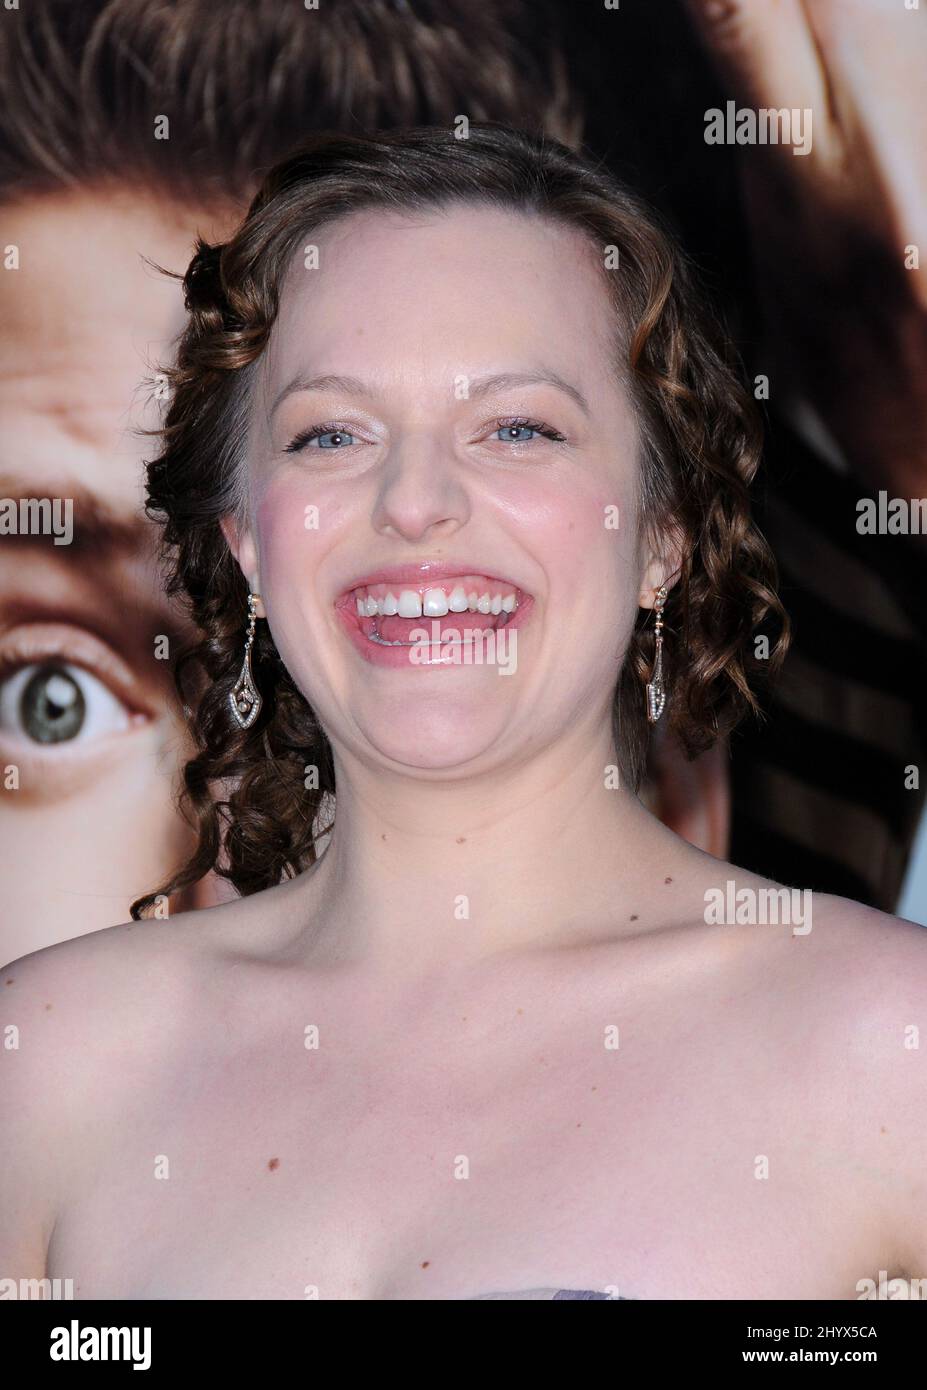 Elisabeth Moss during the World Premiere of "Get Him To The Greek" at The  Greek Theatre, Los Angeles, California Stock Photo - Alamy